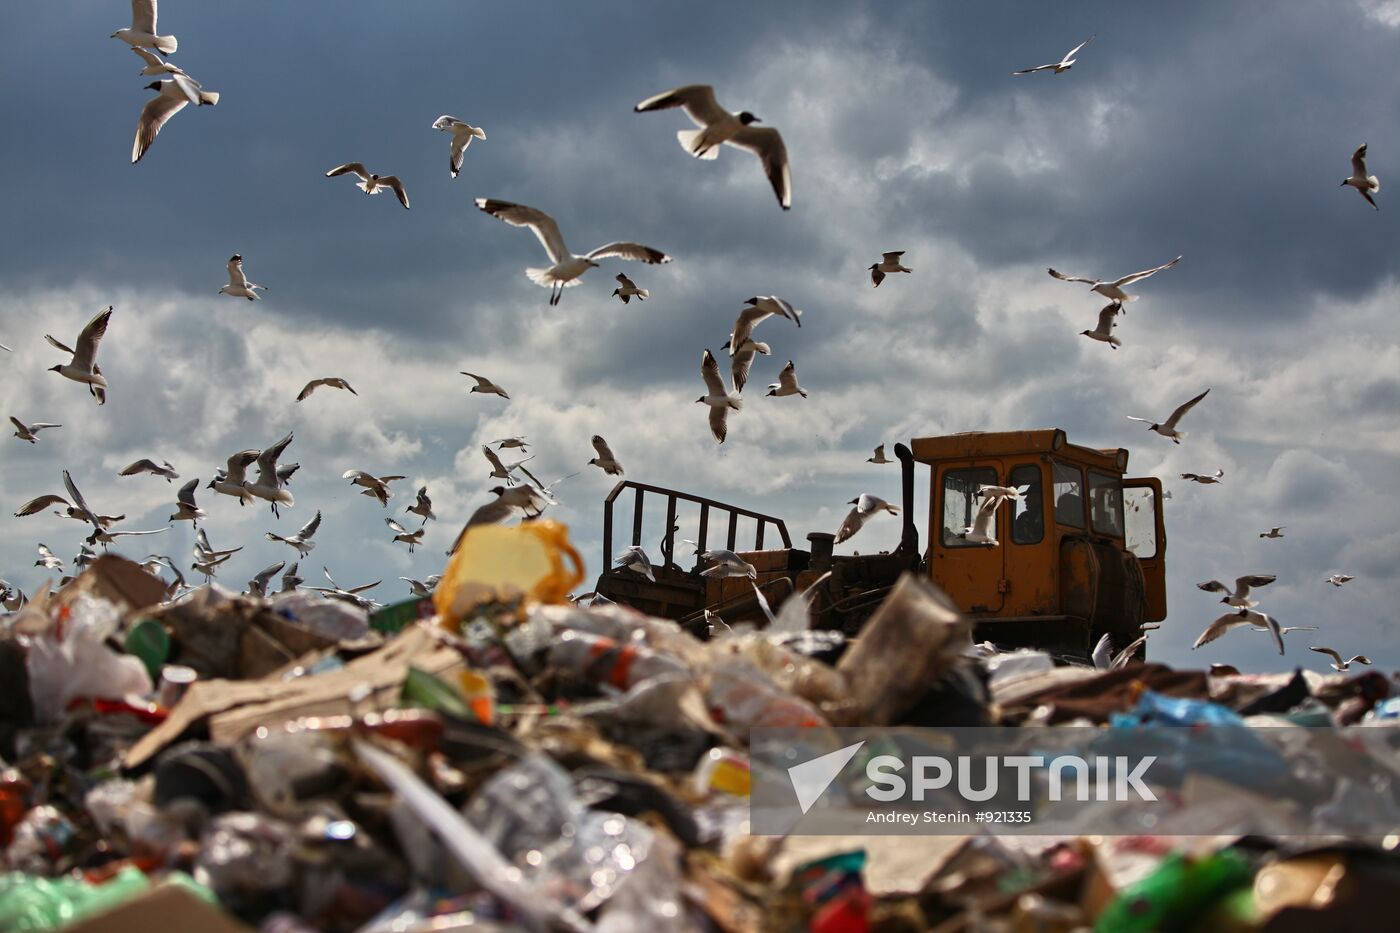 Inspecting solid waste landfills